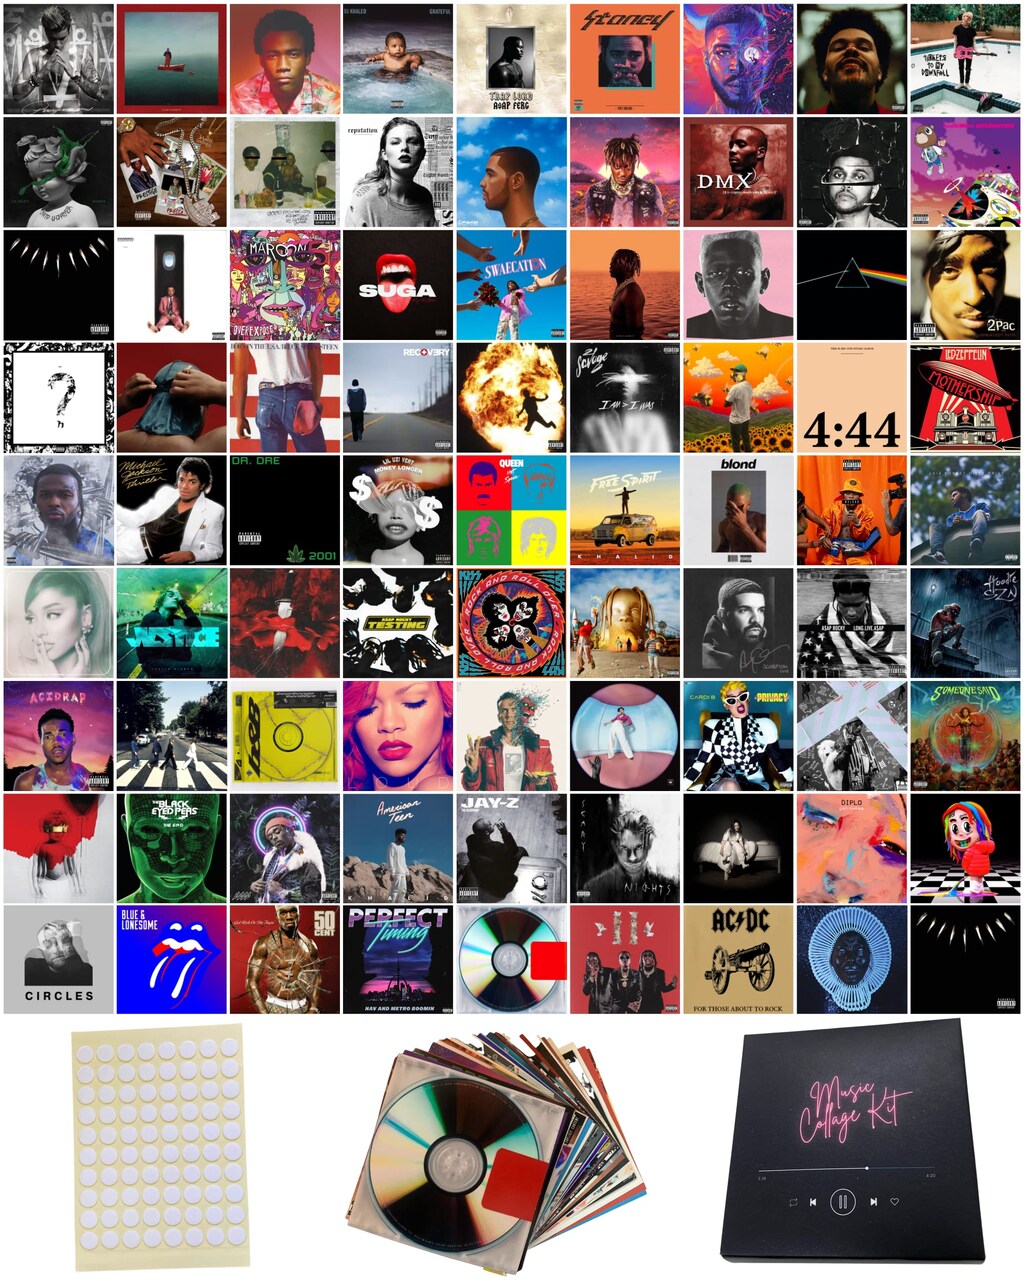 150 Pcs Posters Wall Collage Kit, Album Cover Posters, Posters for Room,  Music Posters, Band Posters, Rapper Posters, Wall Posters, Rap Posters,  Posters for Bedroom 6x6 Inch Total 80